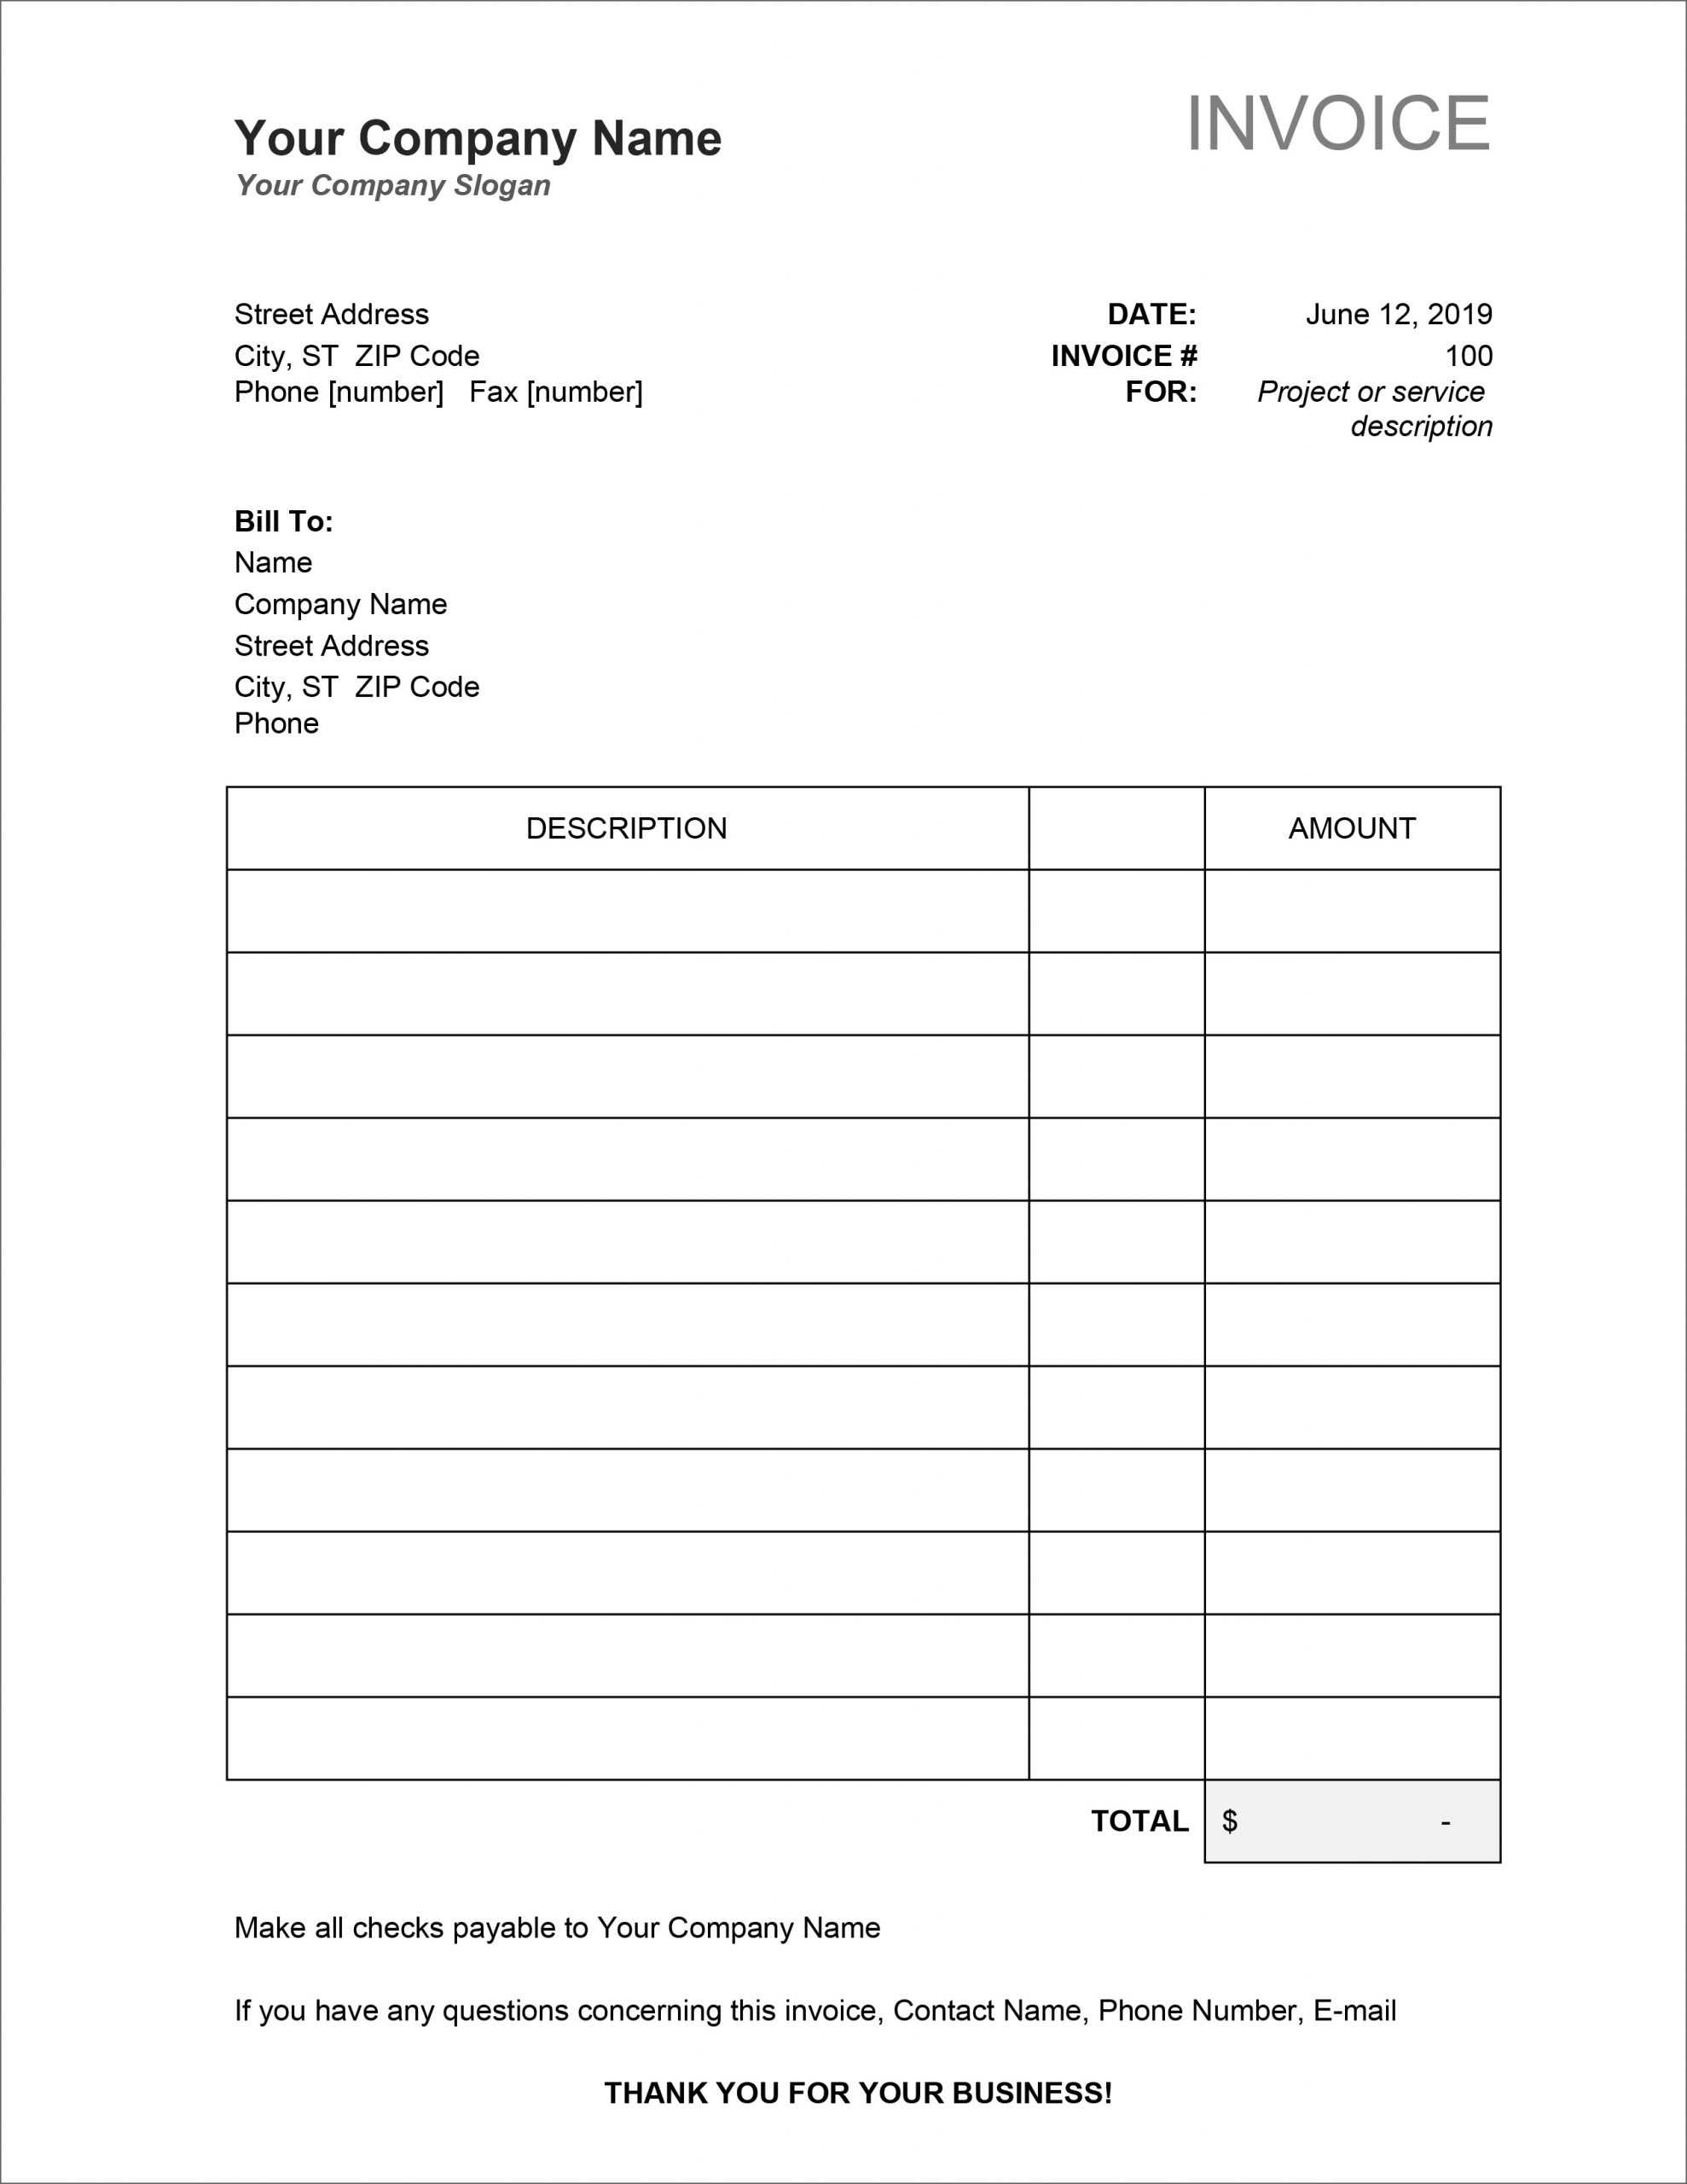 Customizing Invoice Template Excel Work Estimate Key Net Throughout Work Estimate Template Word